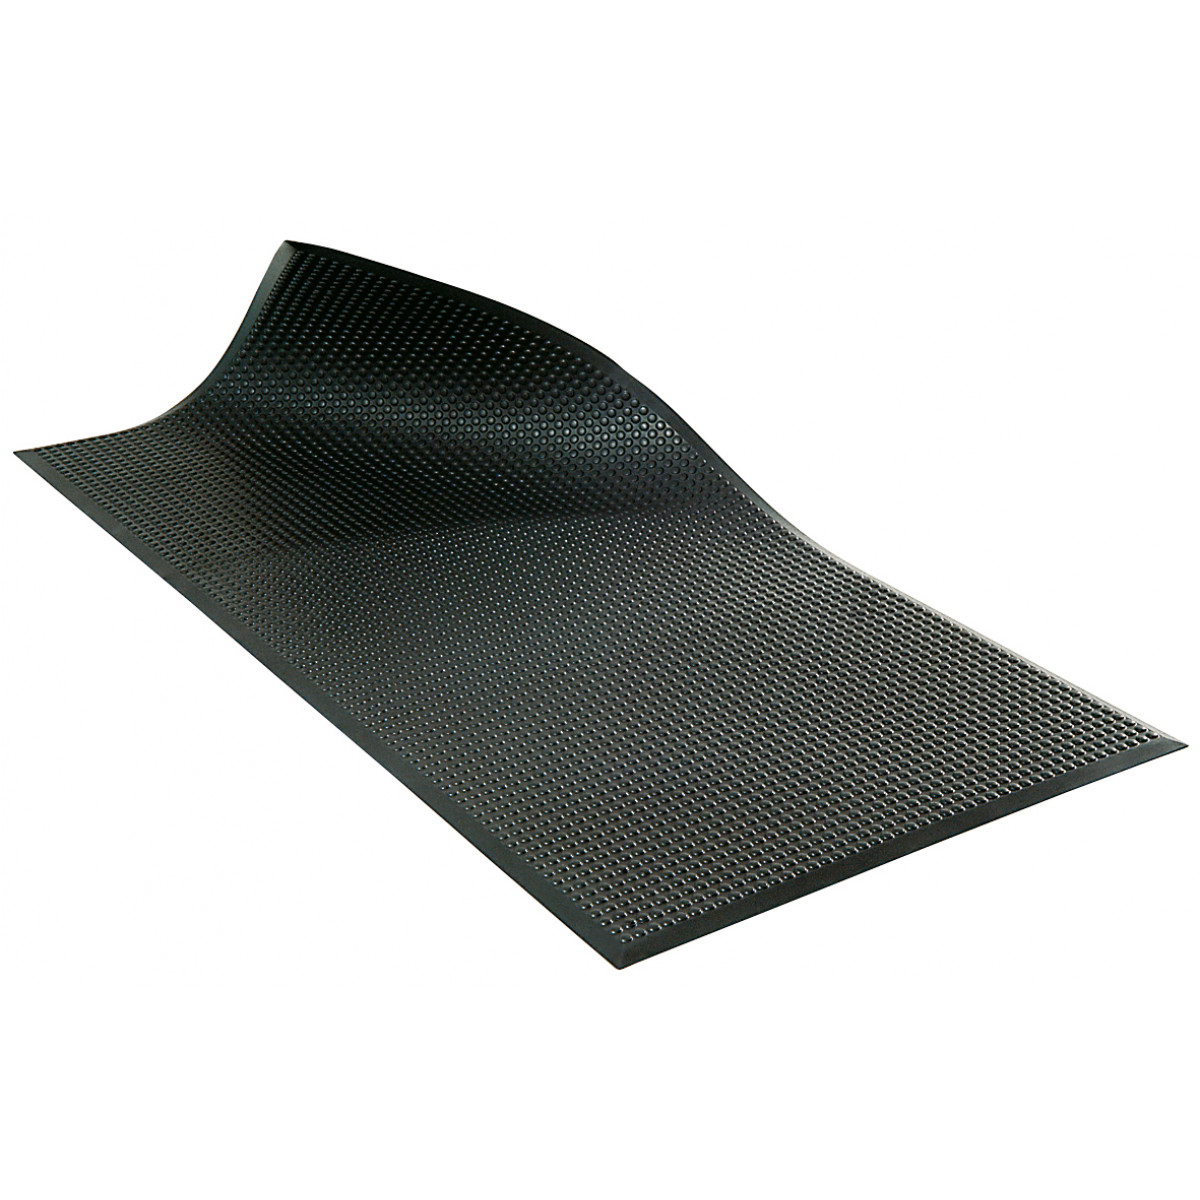 ESD rotary comfort mats for standing workstations